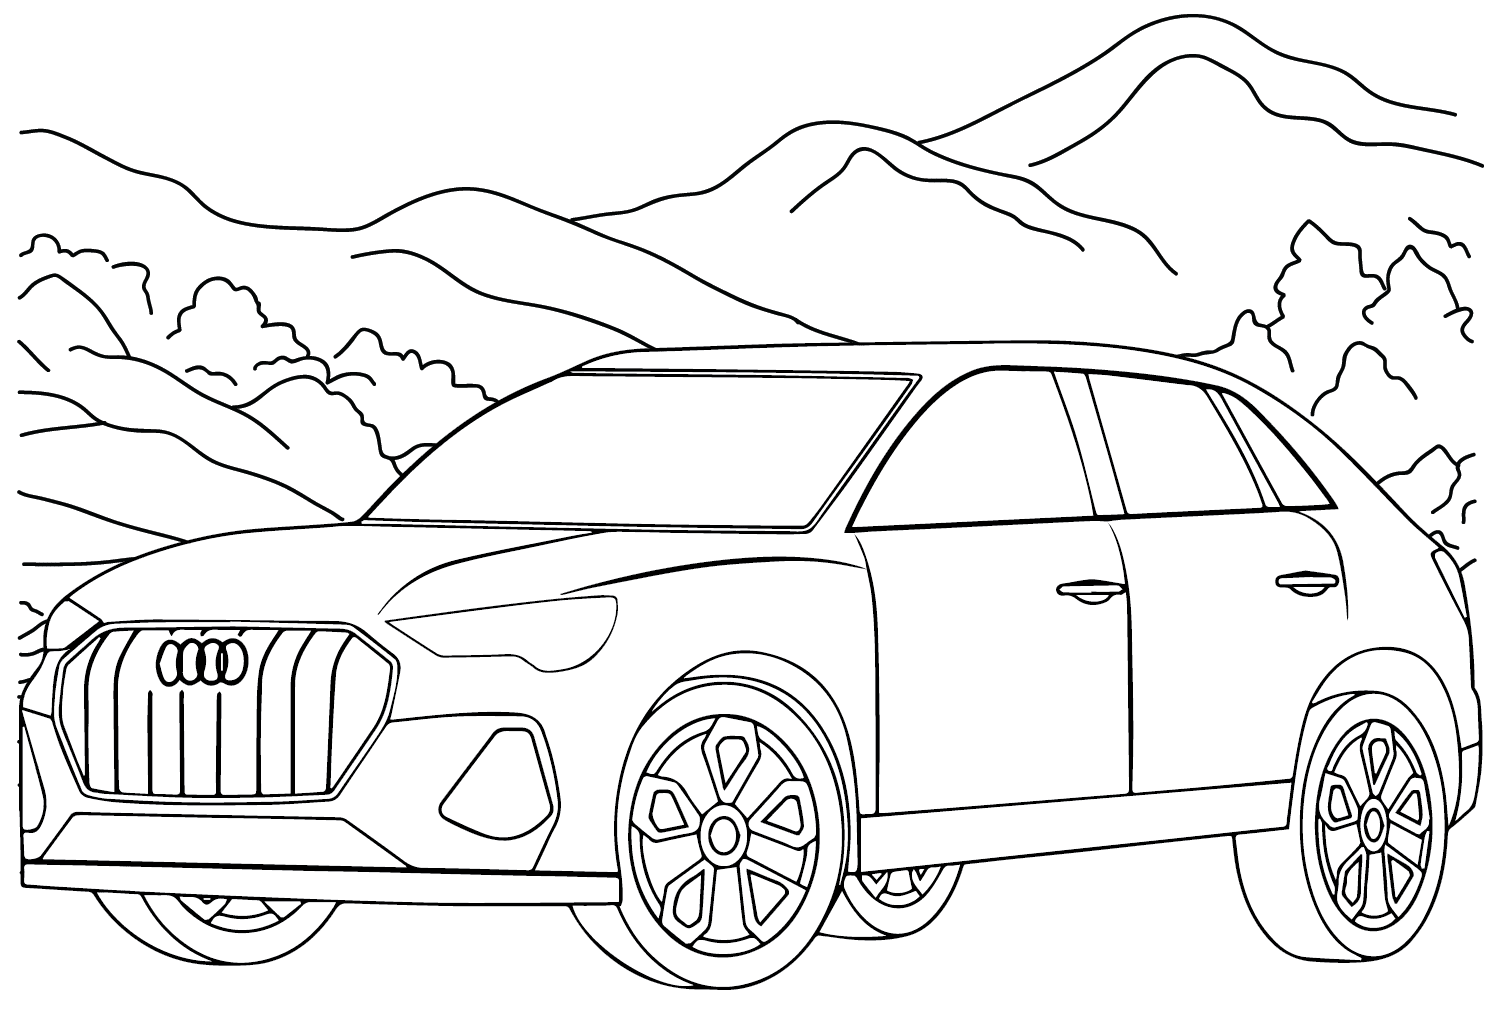 Audi Q3 Coloring Page from Audi